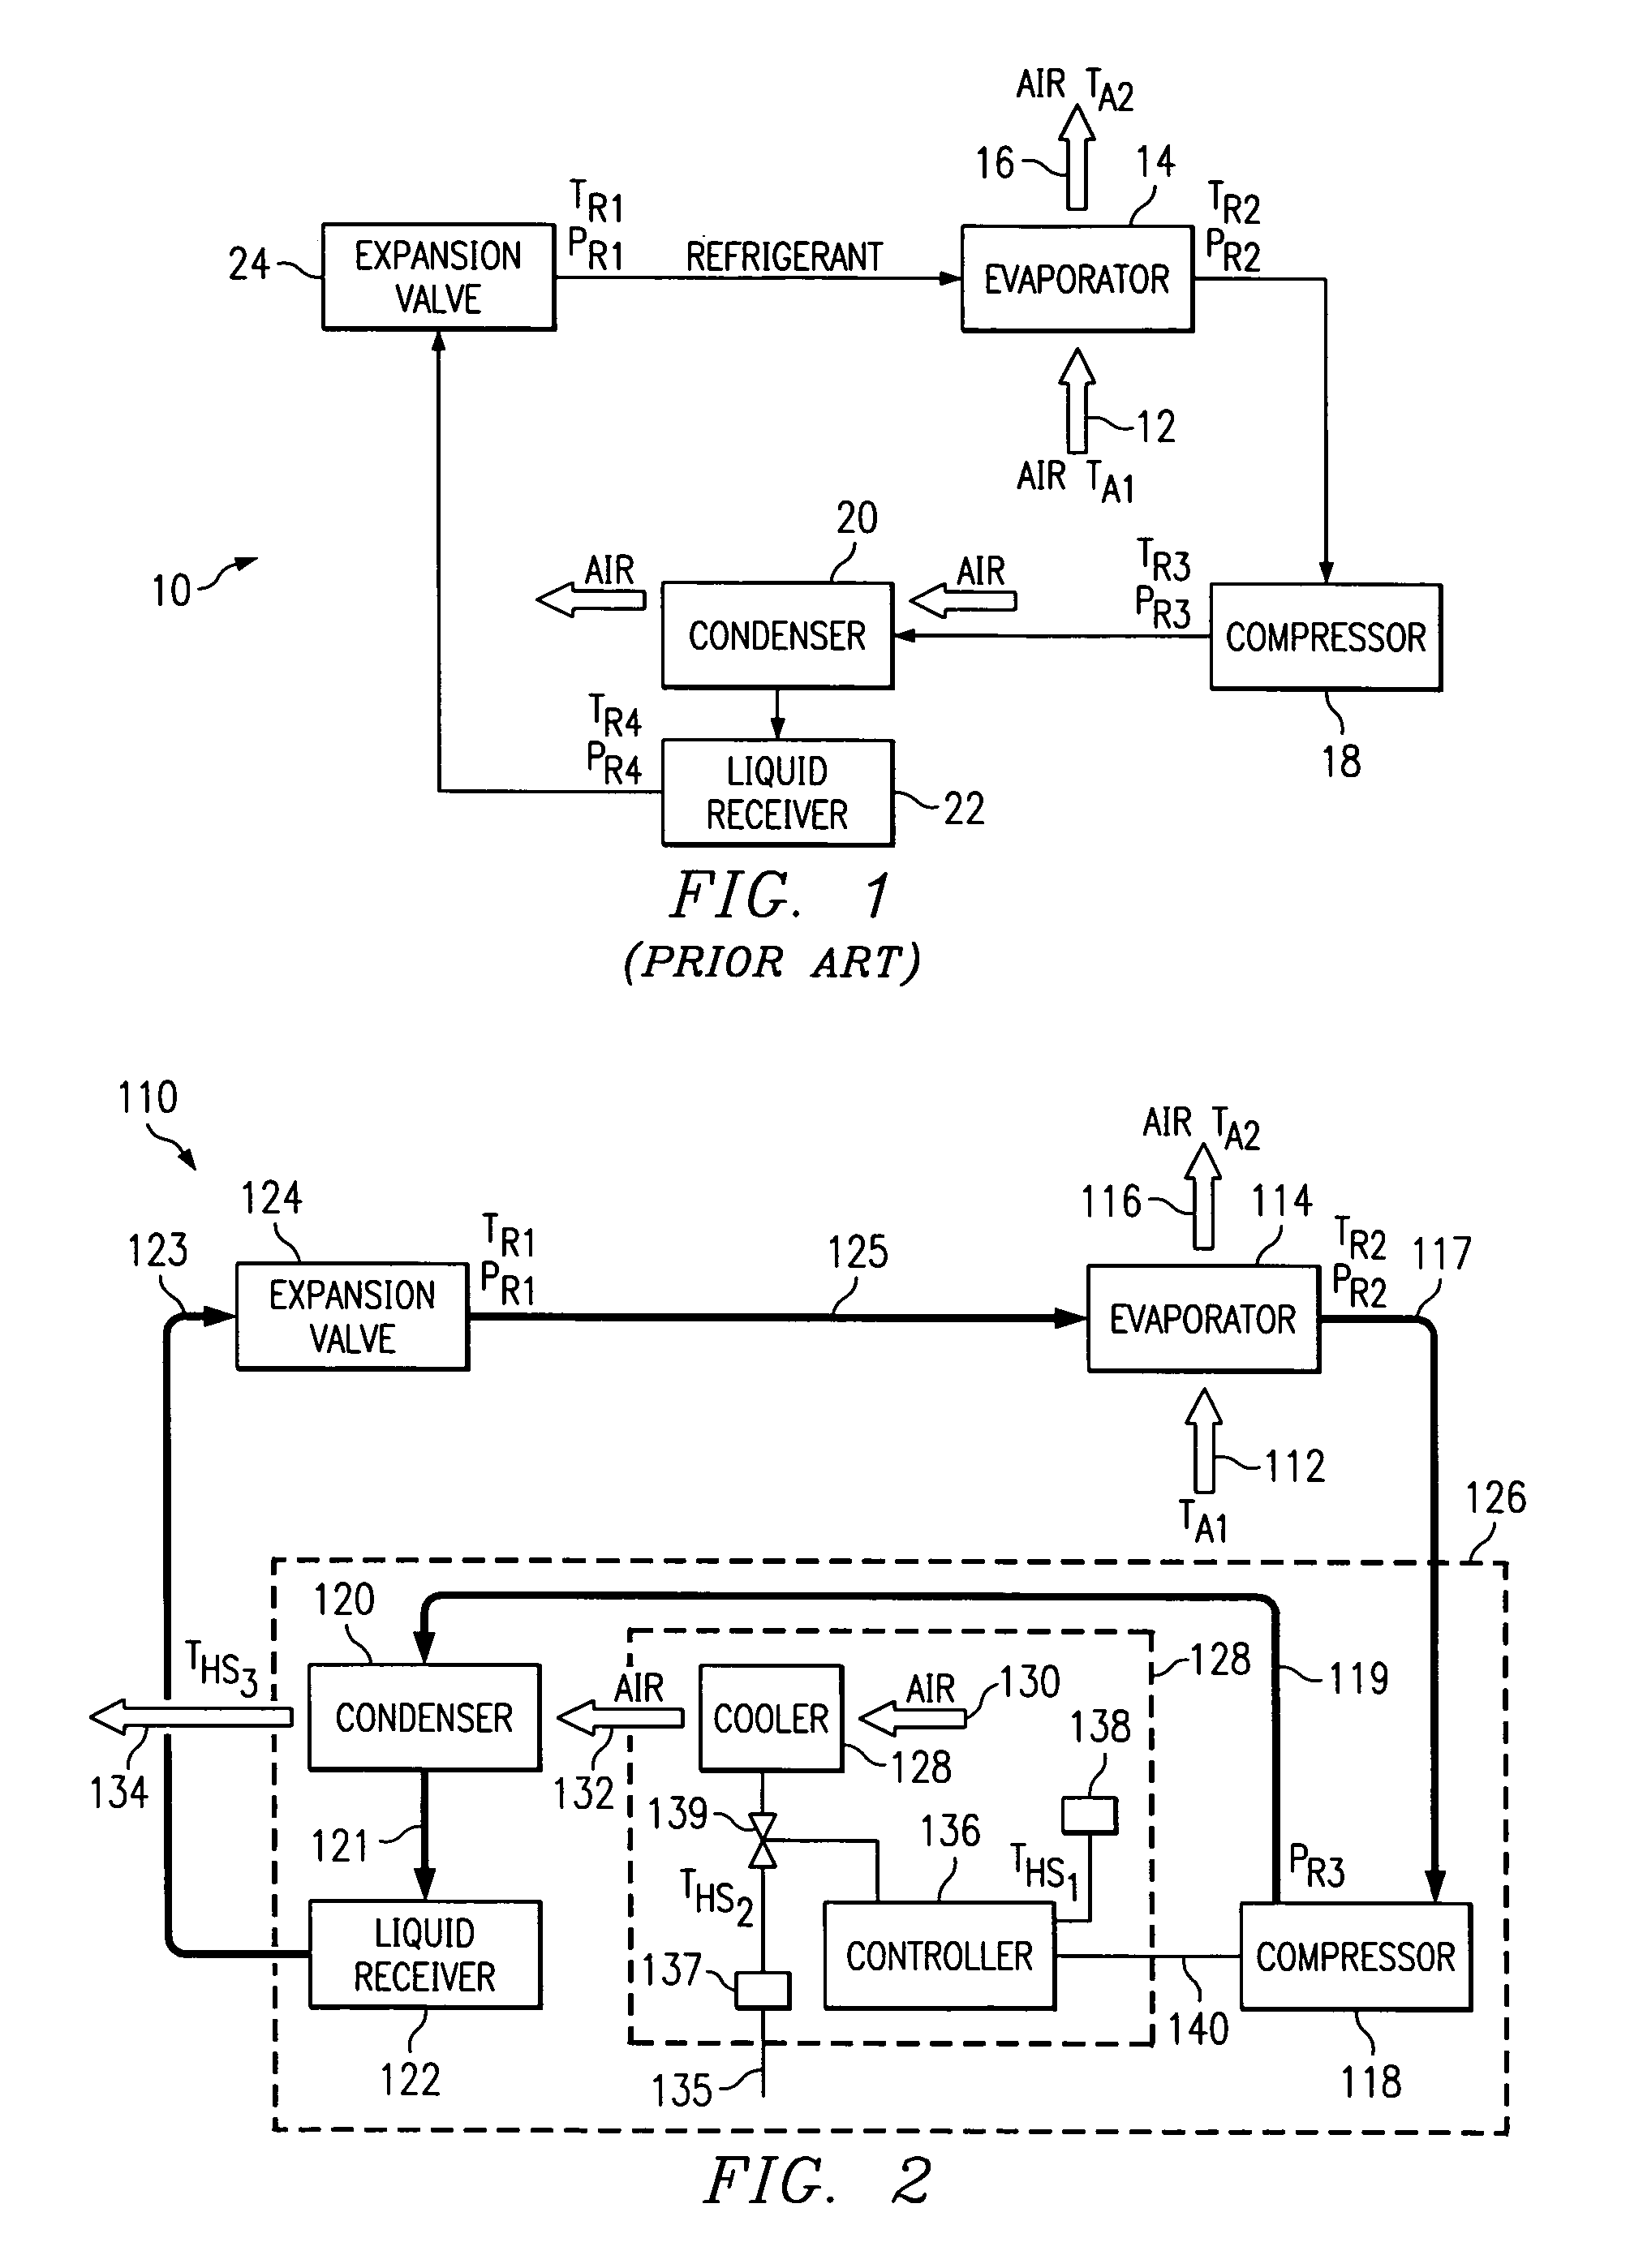 System and method for cooling air